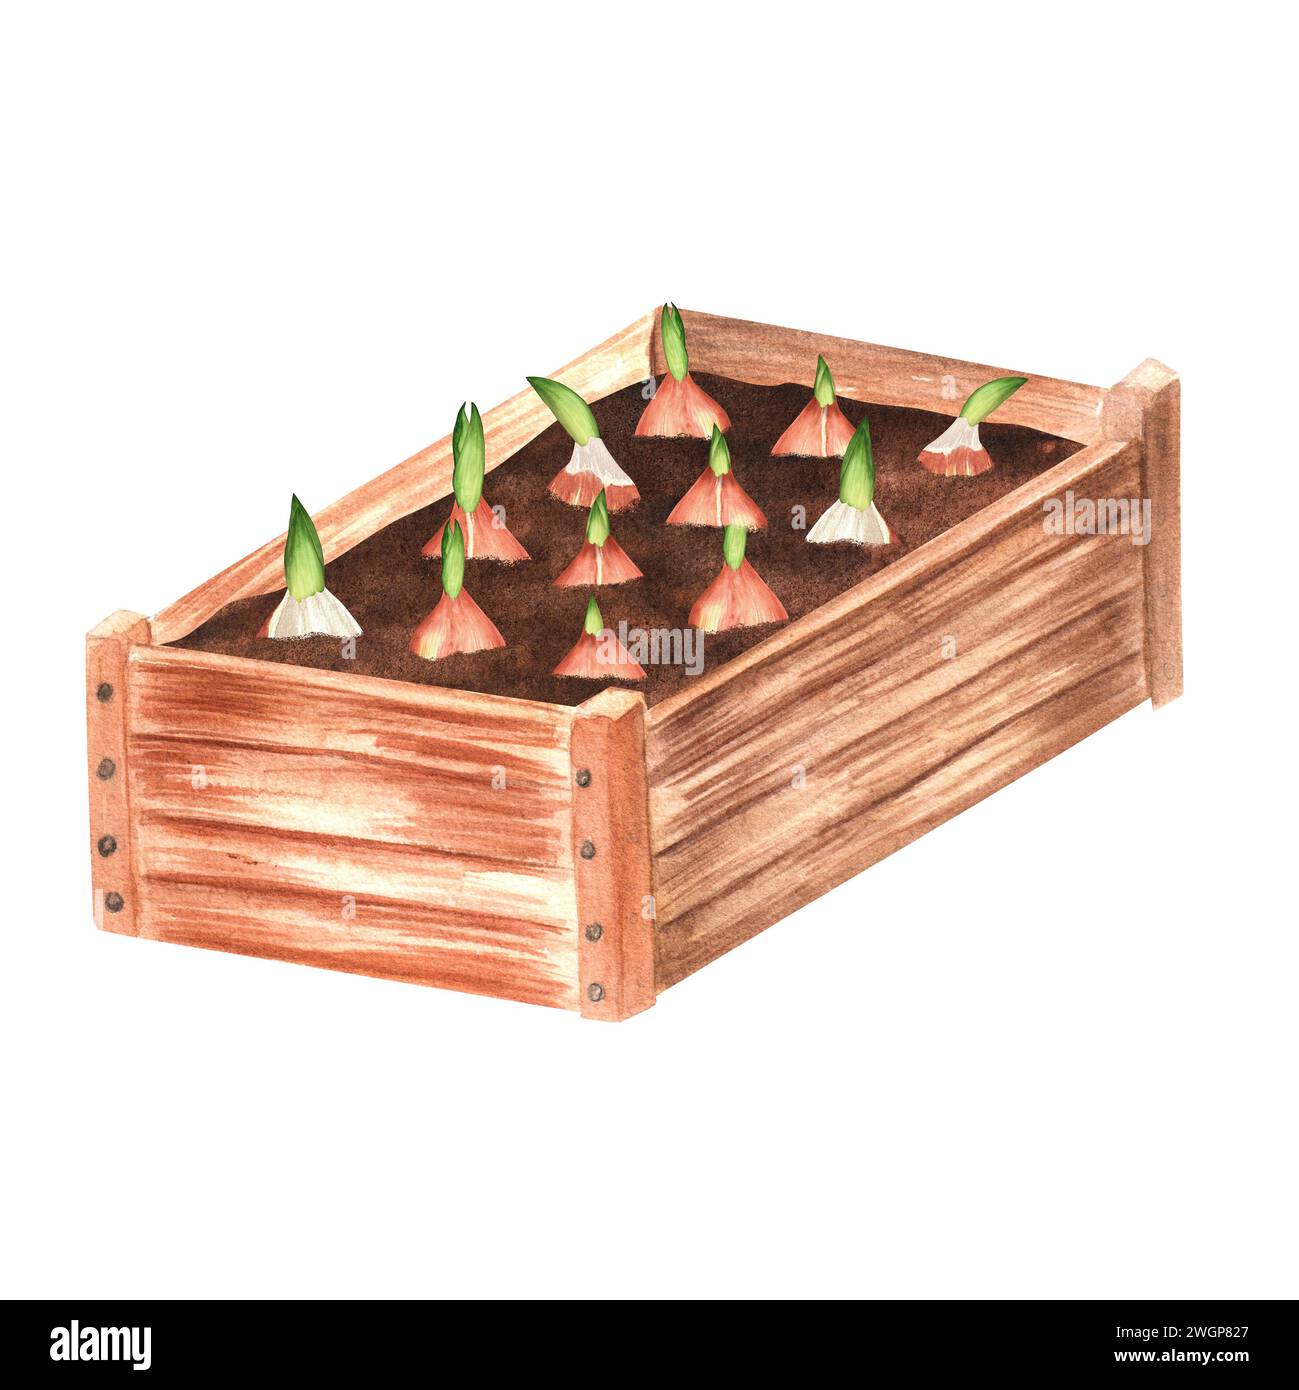 Hand-drawn watercolor illustration. A wooden garden crate with planted tulip bulbs. Diagonal view. Stock Photo